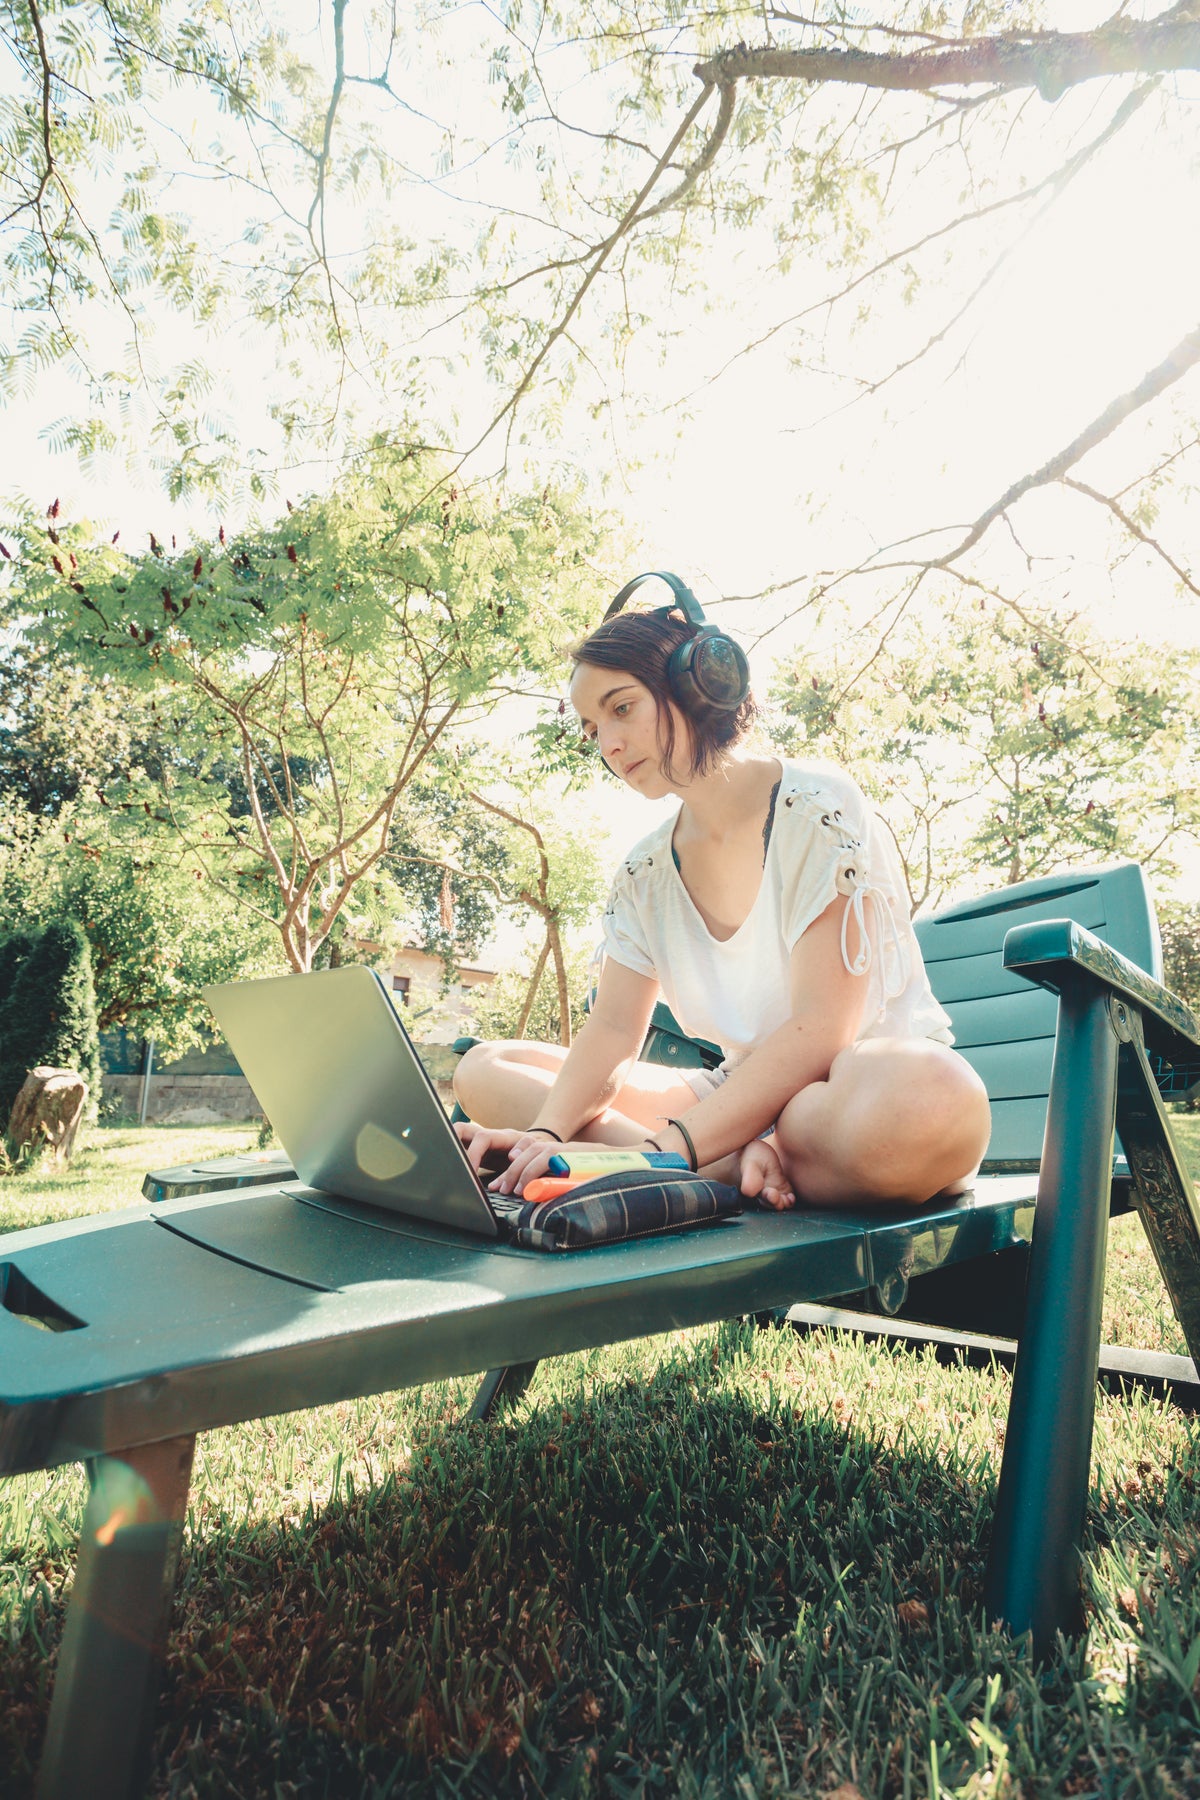 woman works on her laptop outdoors in green lawn chair